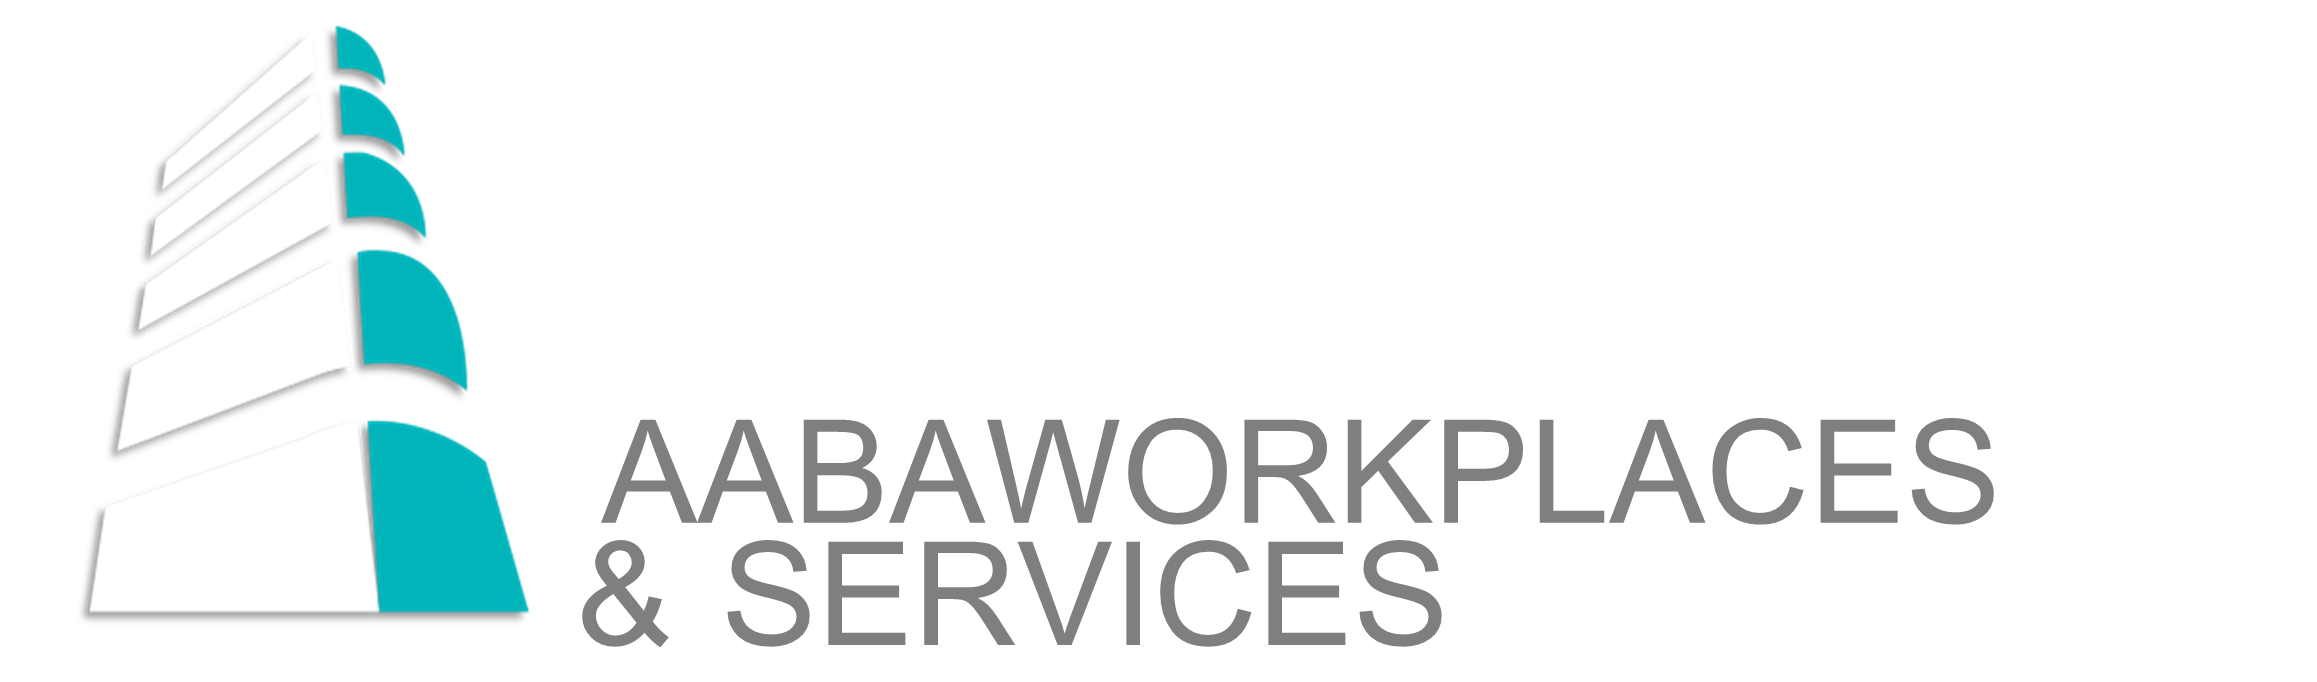 Aabaworkplaces Logo